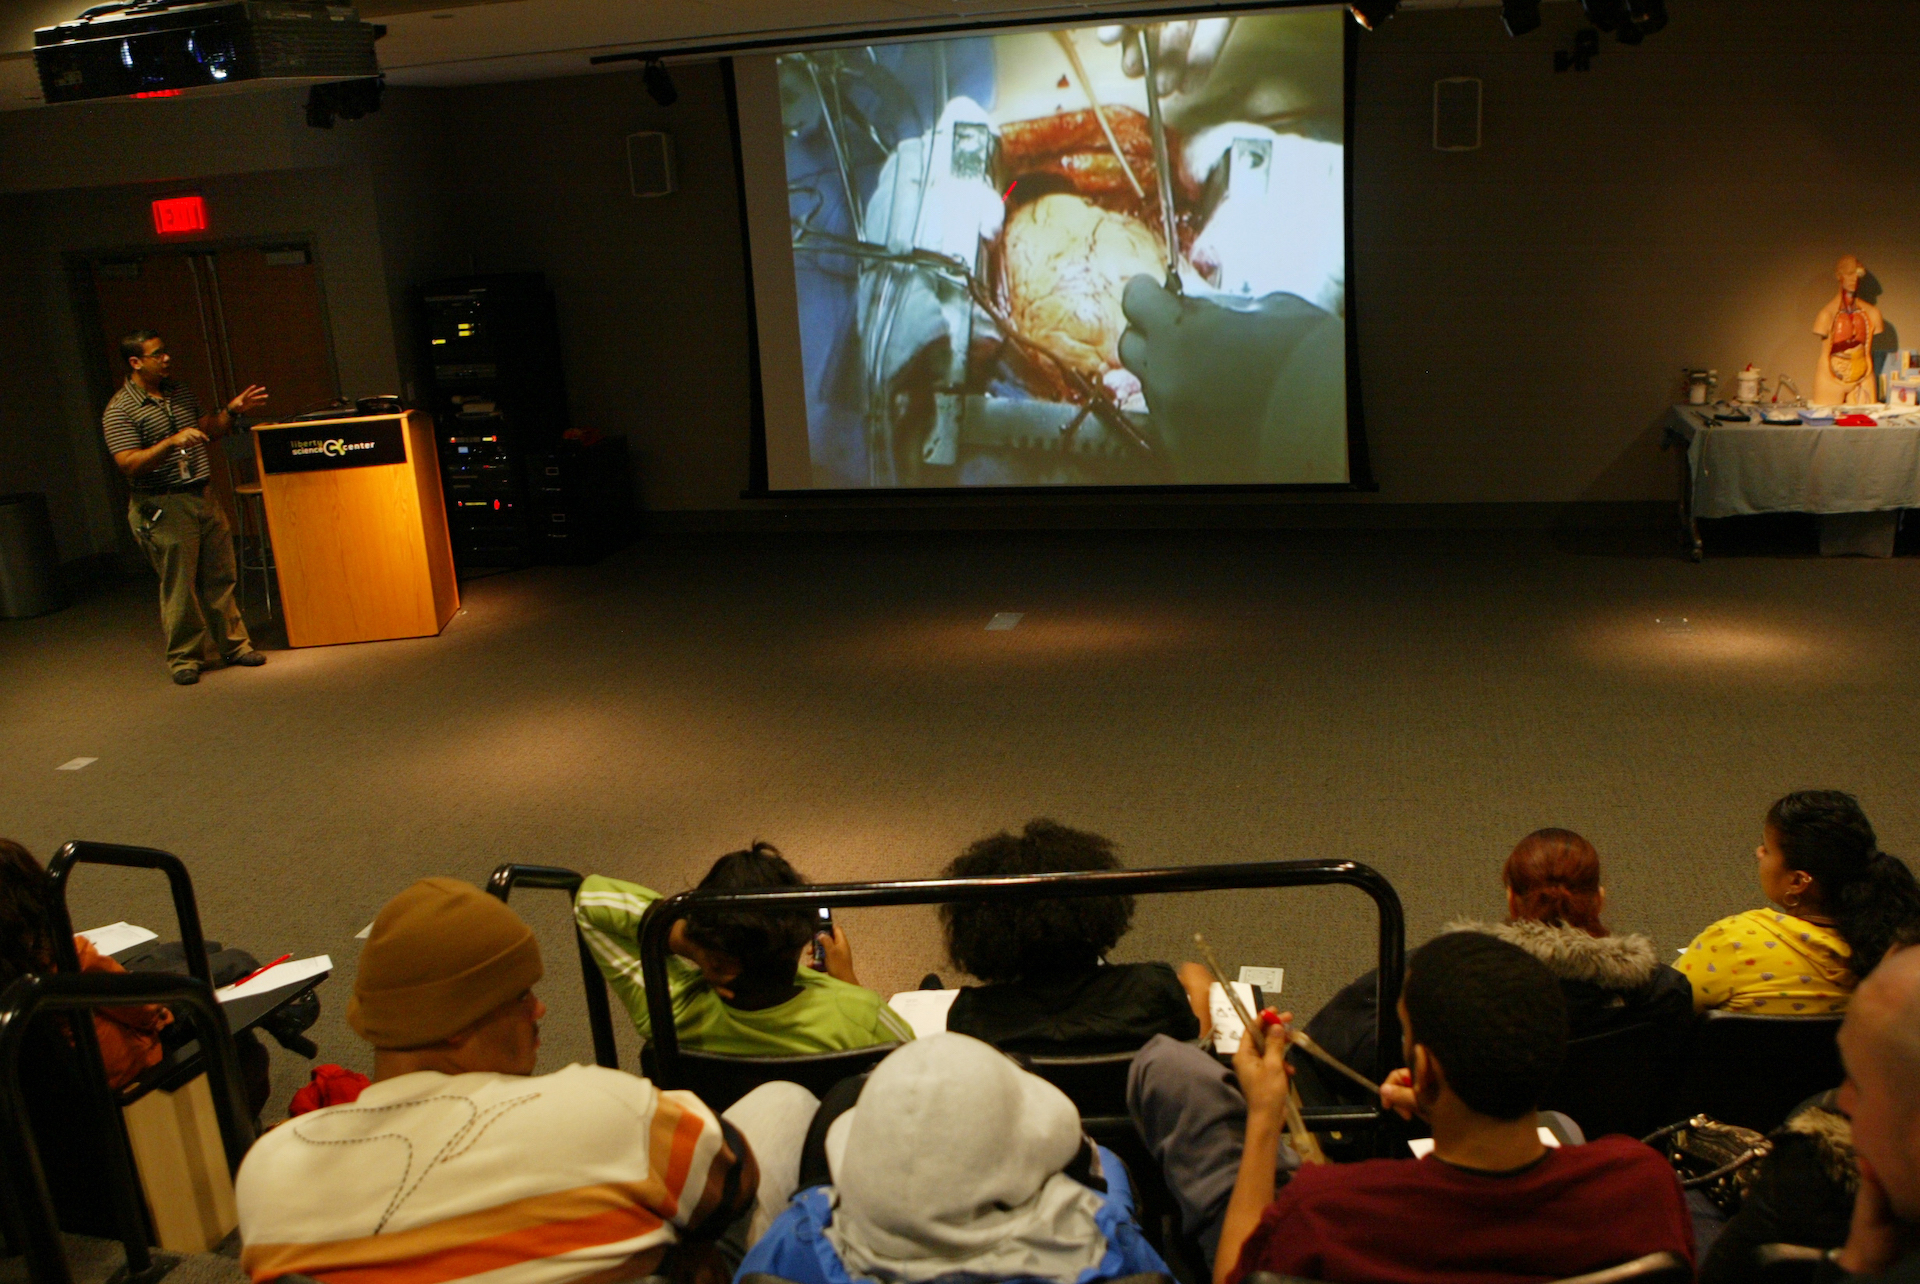 Students watching live on-screen surgery